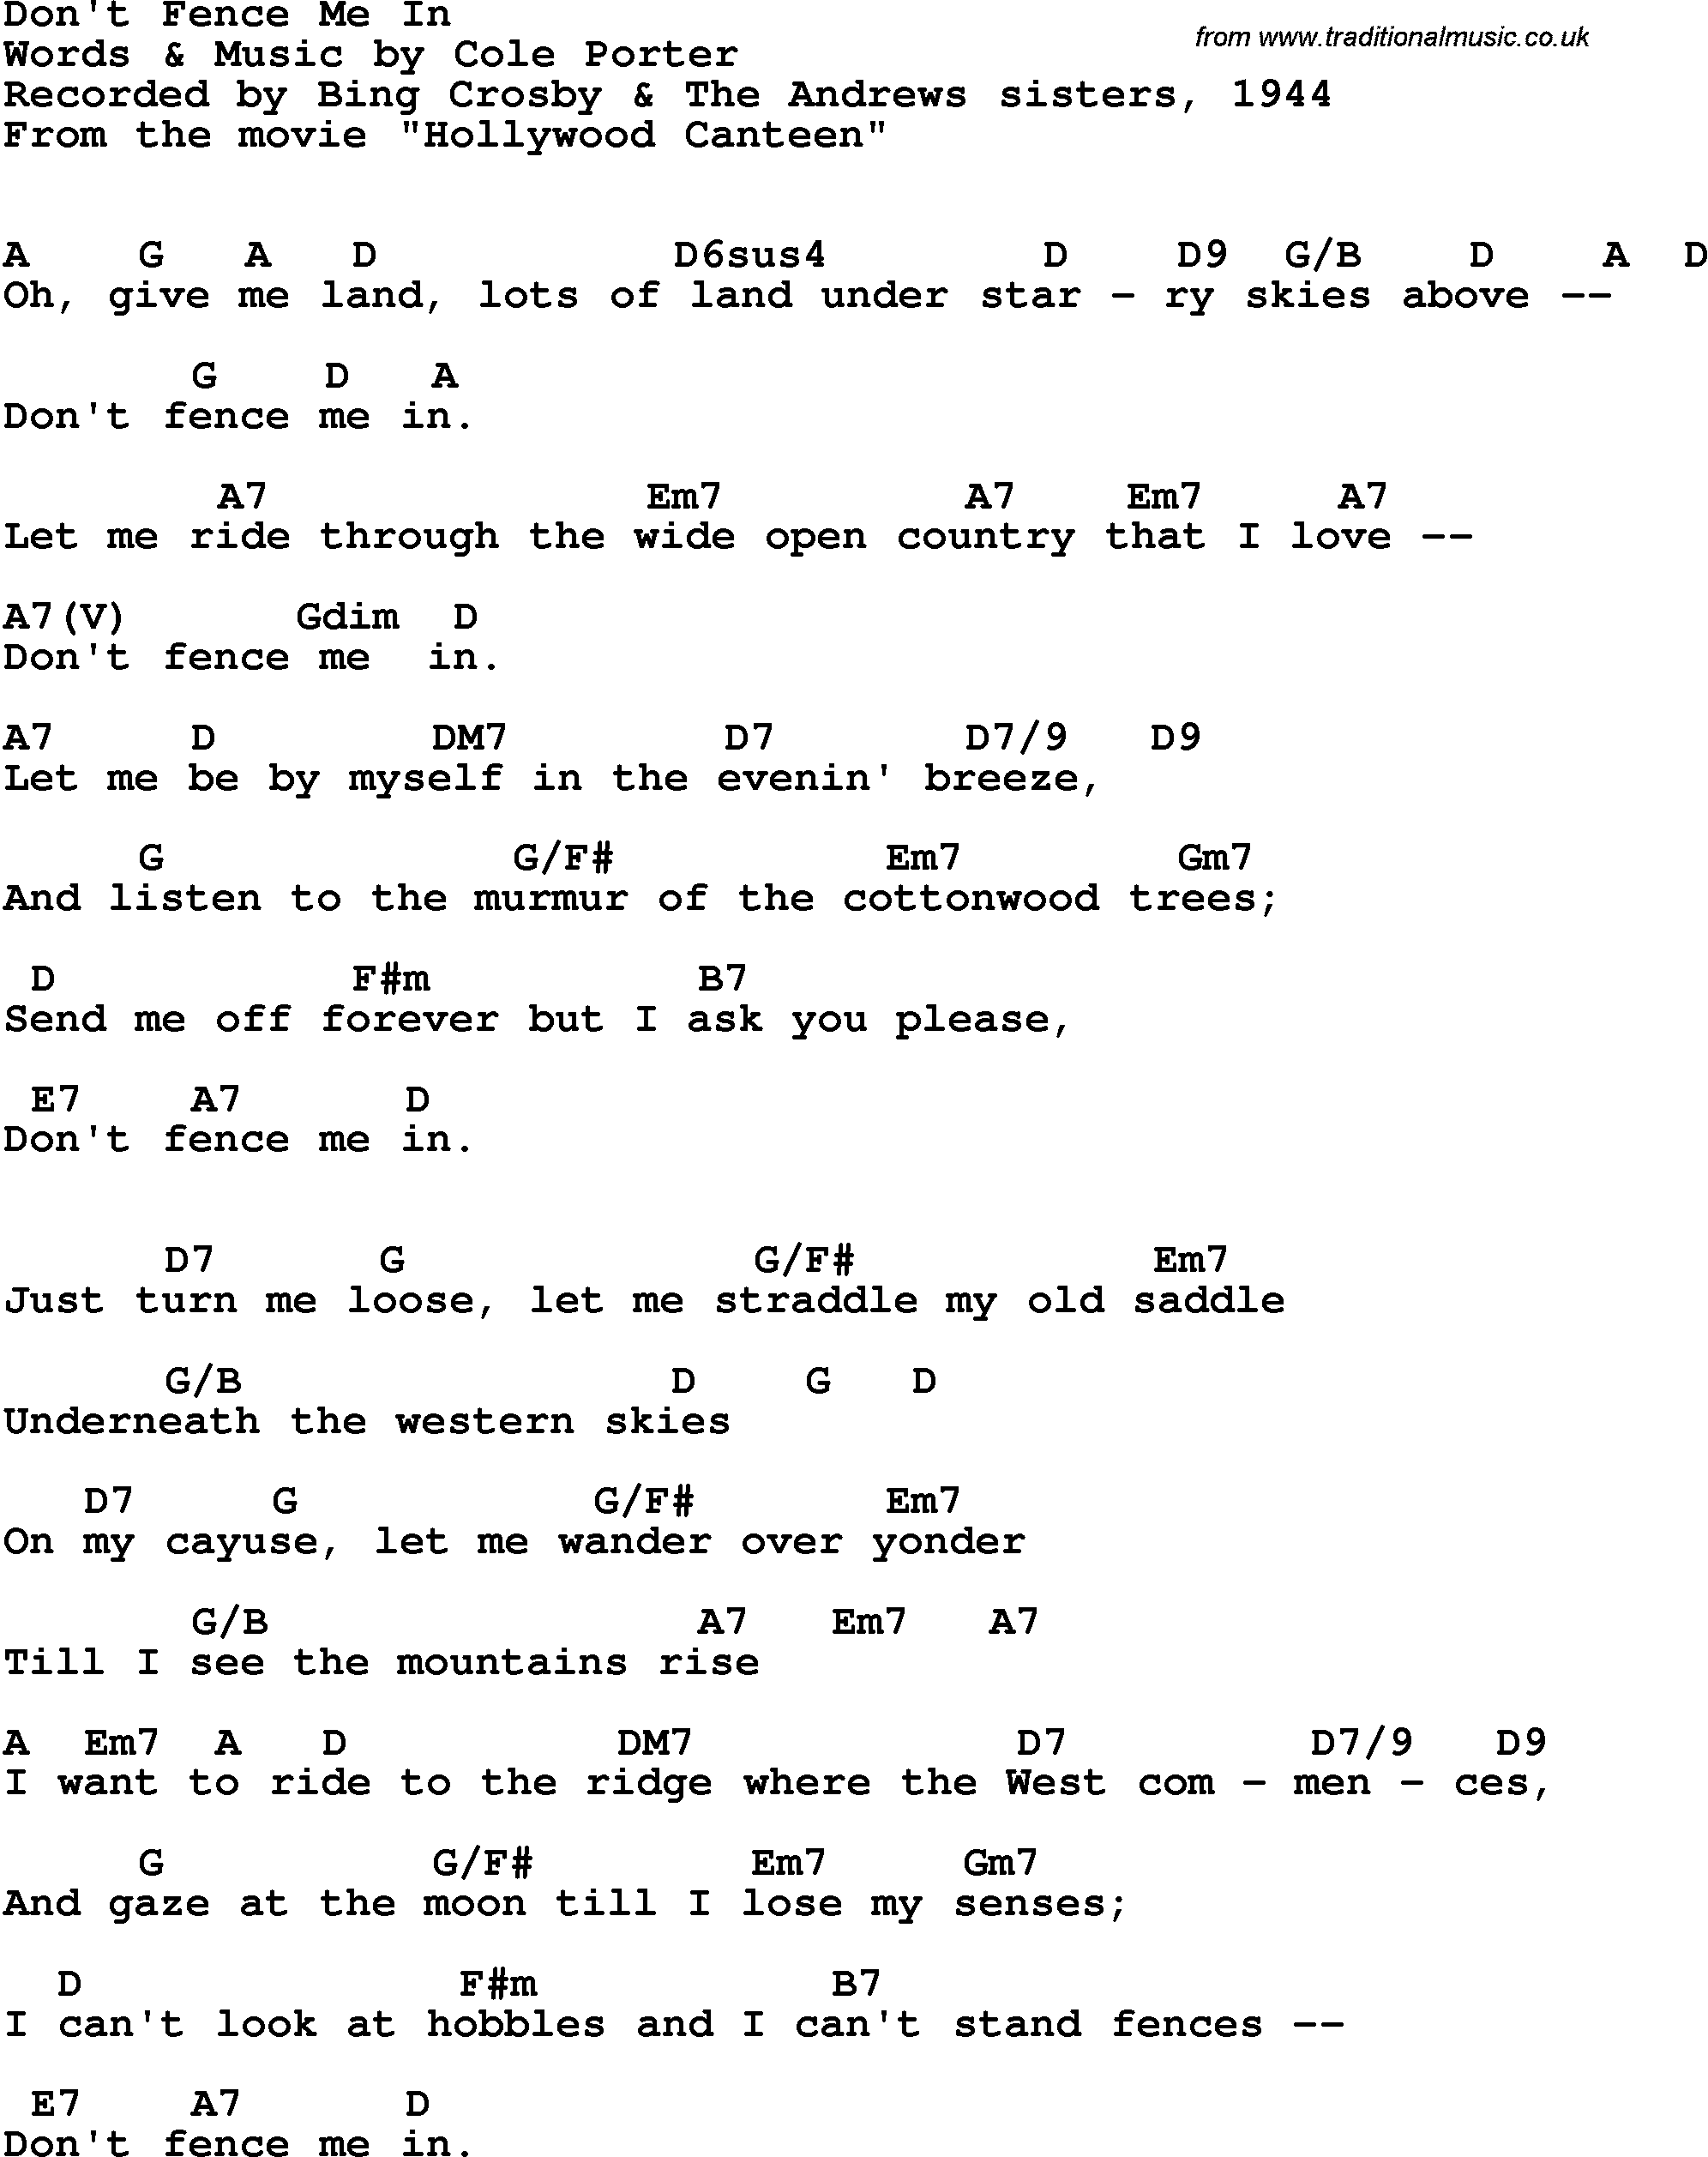 Song Lyrics with guitar chords for Don't Fence Me In - Bing Crosby With The Andrews Sisters, 1944